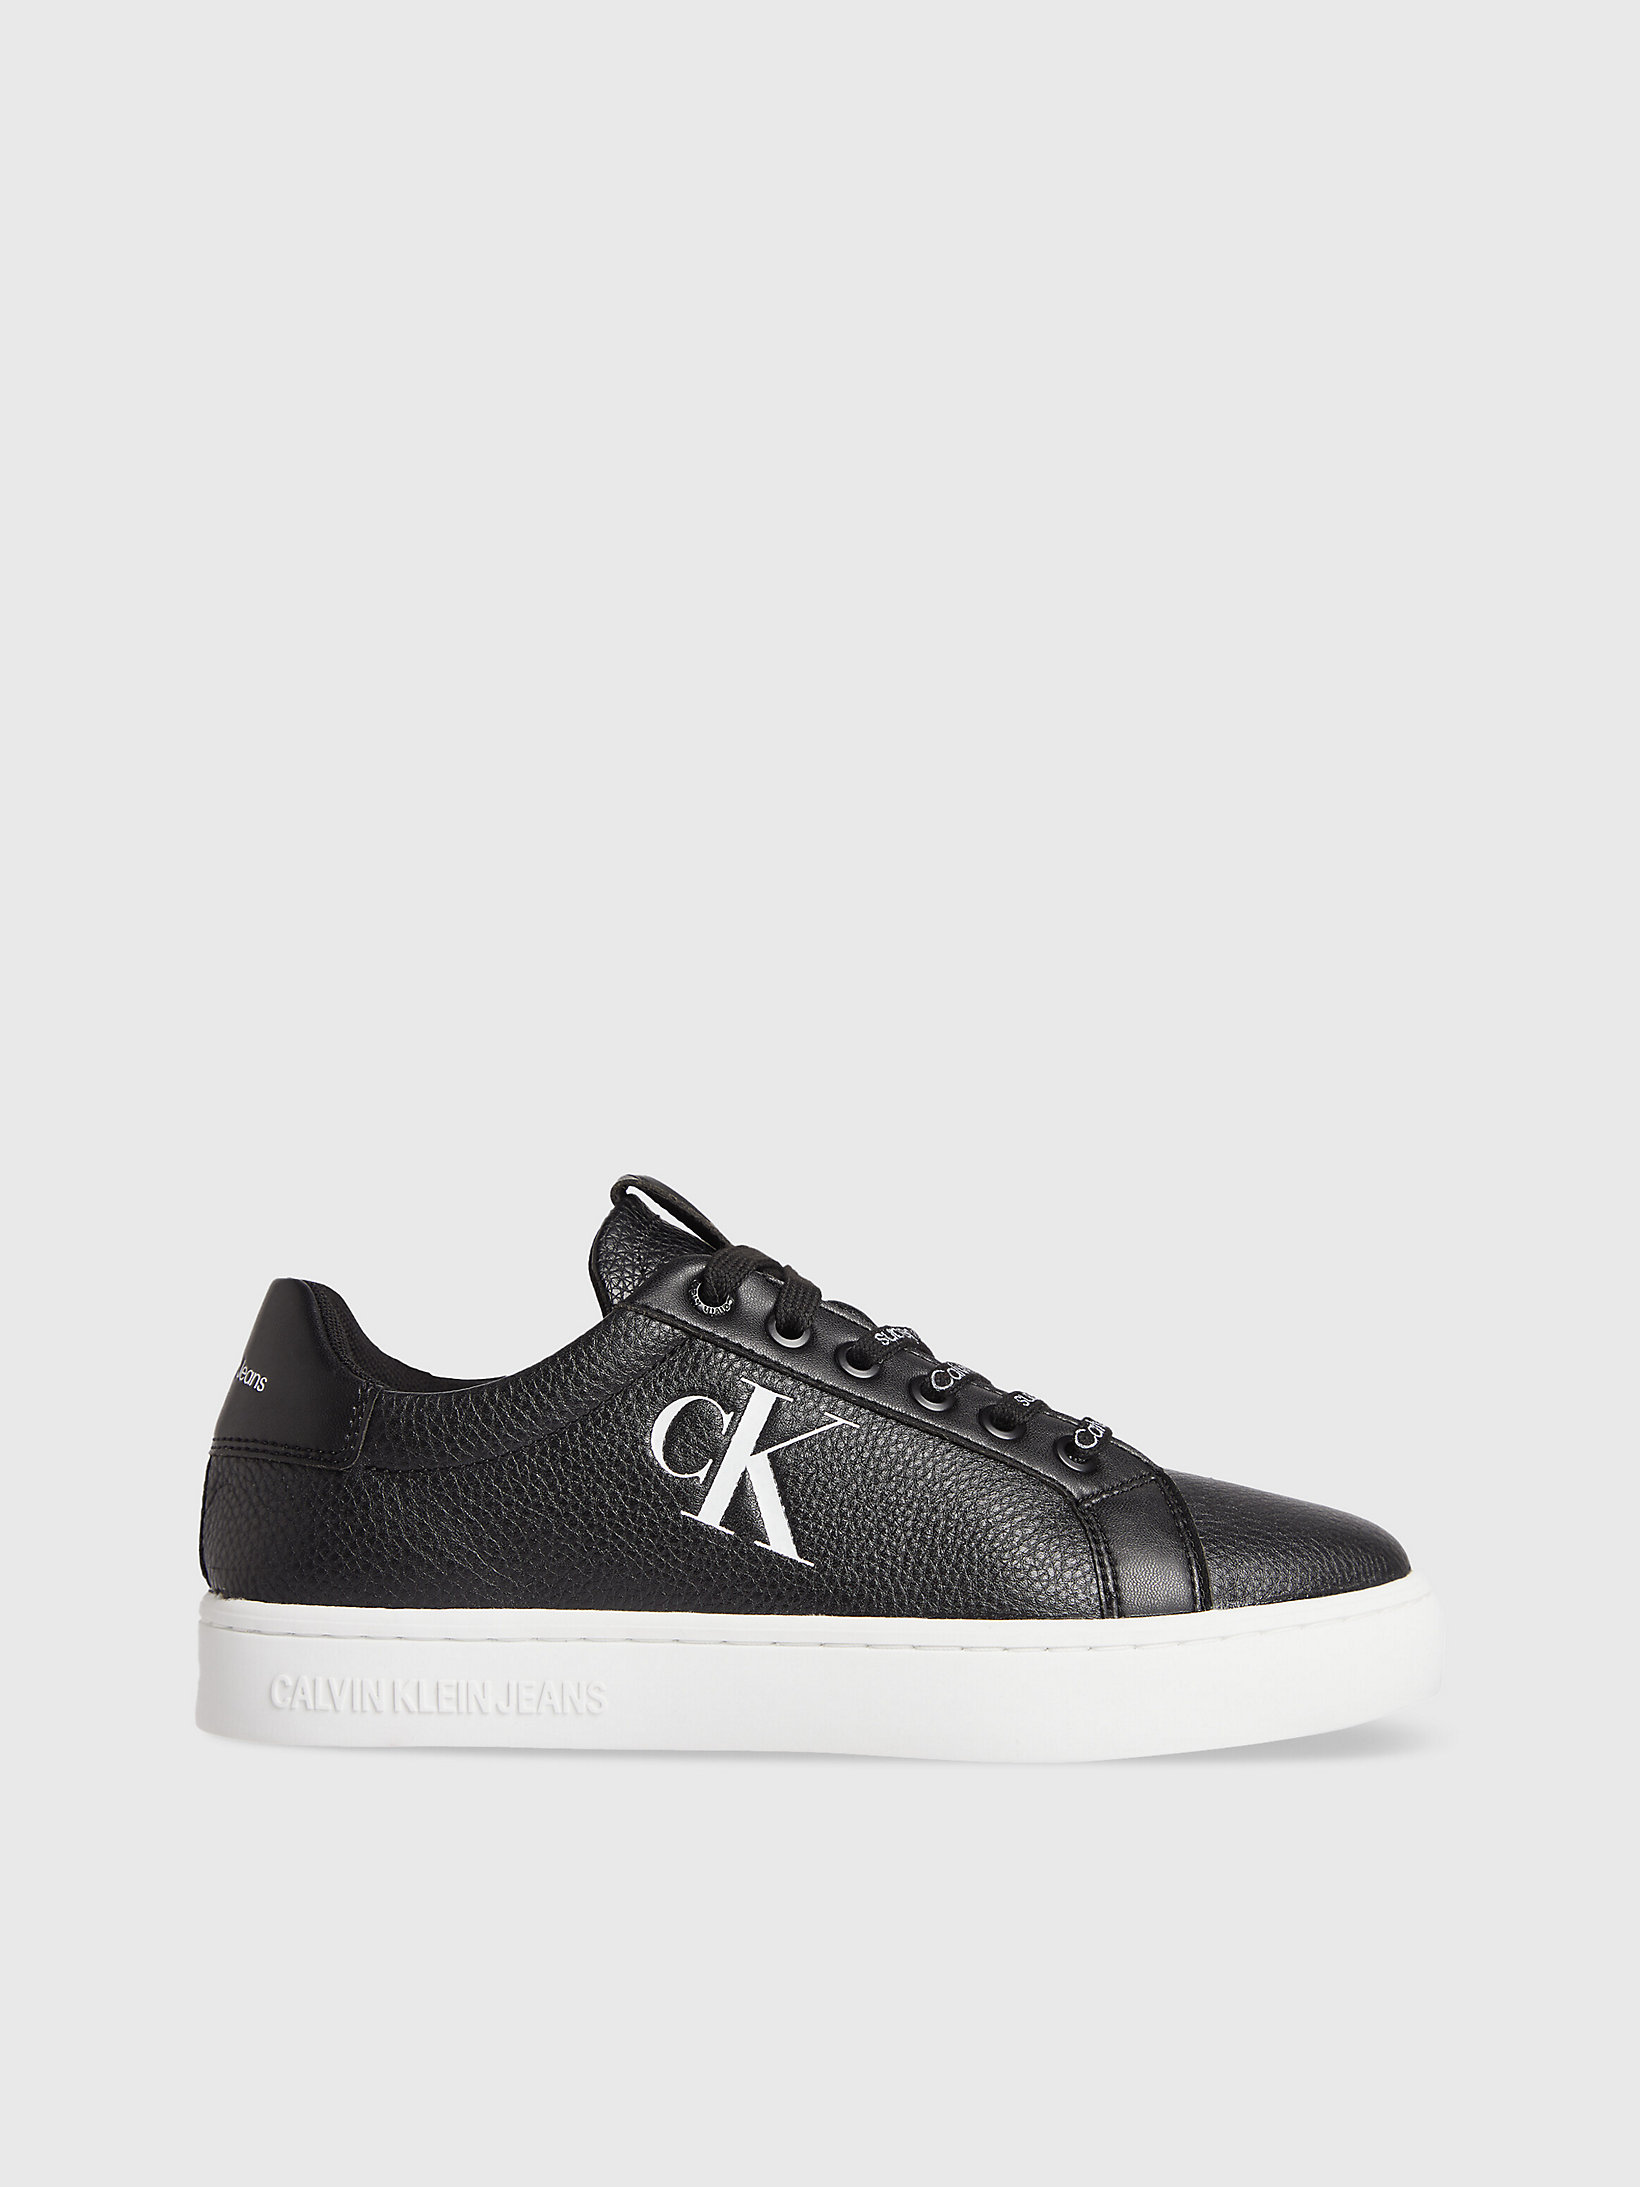 Black / White Leather Trainers undefined women Calvin Klein